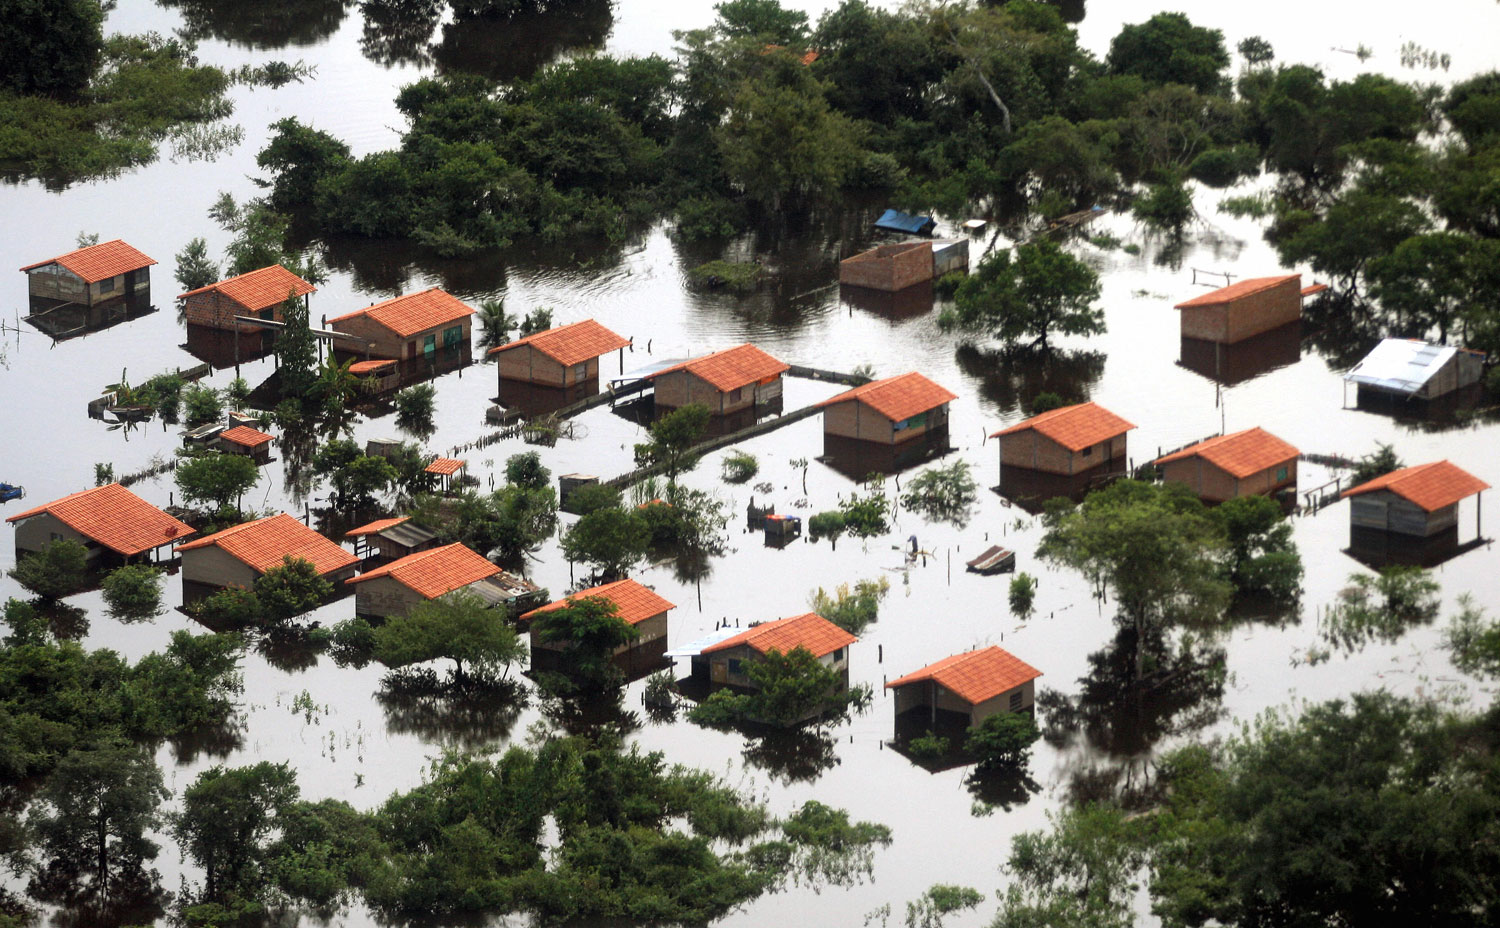 Aerial view of a flooded area in Trinidad, Beni, Bolivia on Feb. 24, 2007. Authorities say two months of rain and floods left 35 people dead, 10 unaccounted for, and affected hundreds of thousands of people. The disaster, blamed on the 